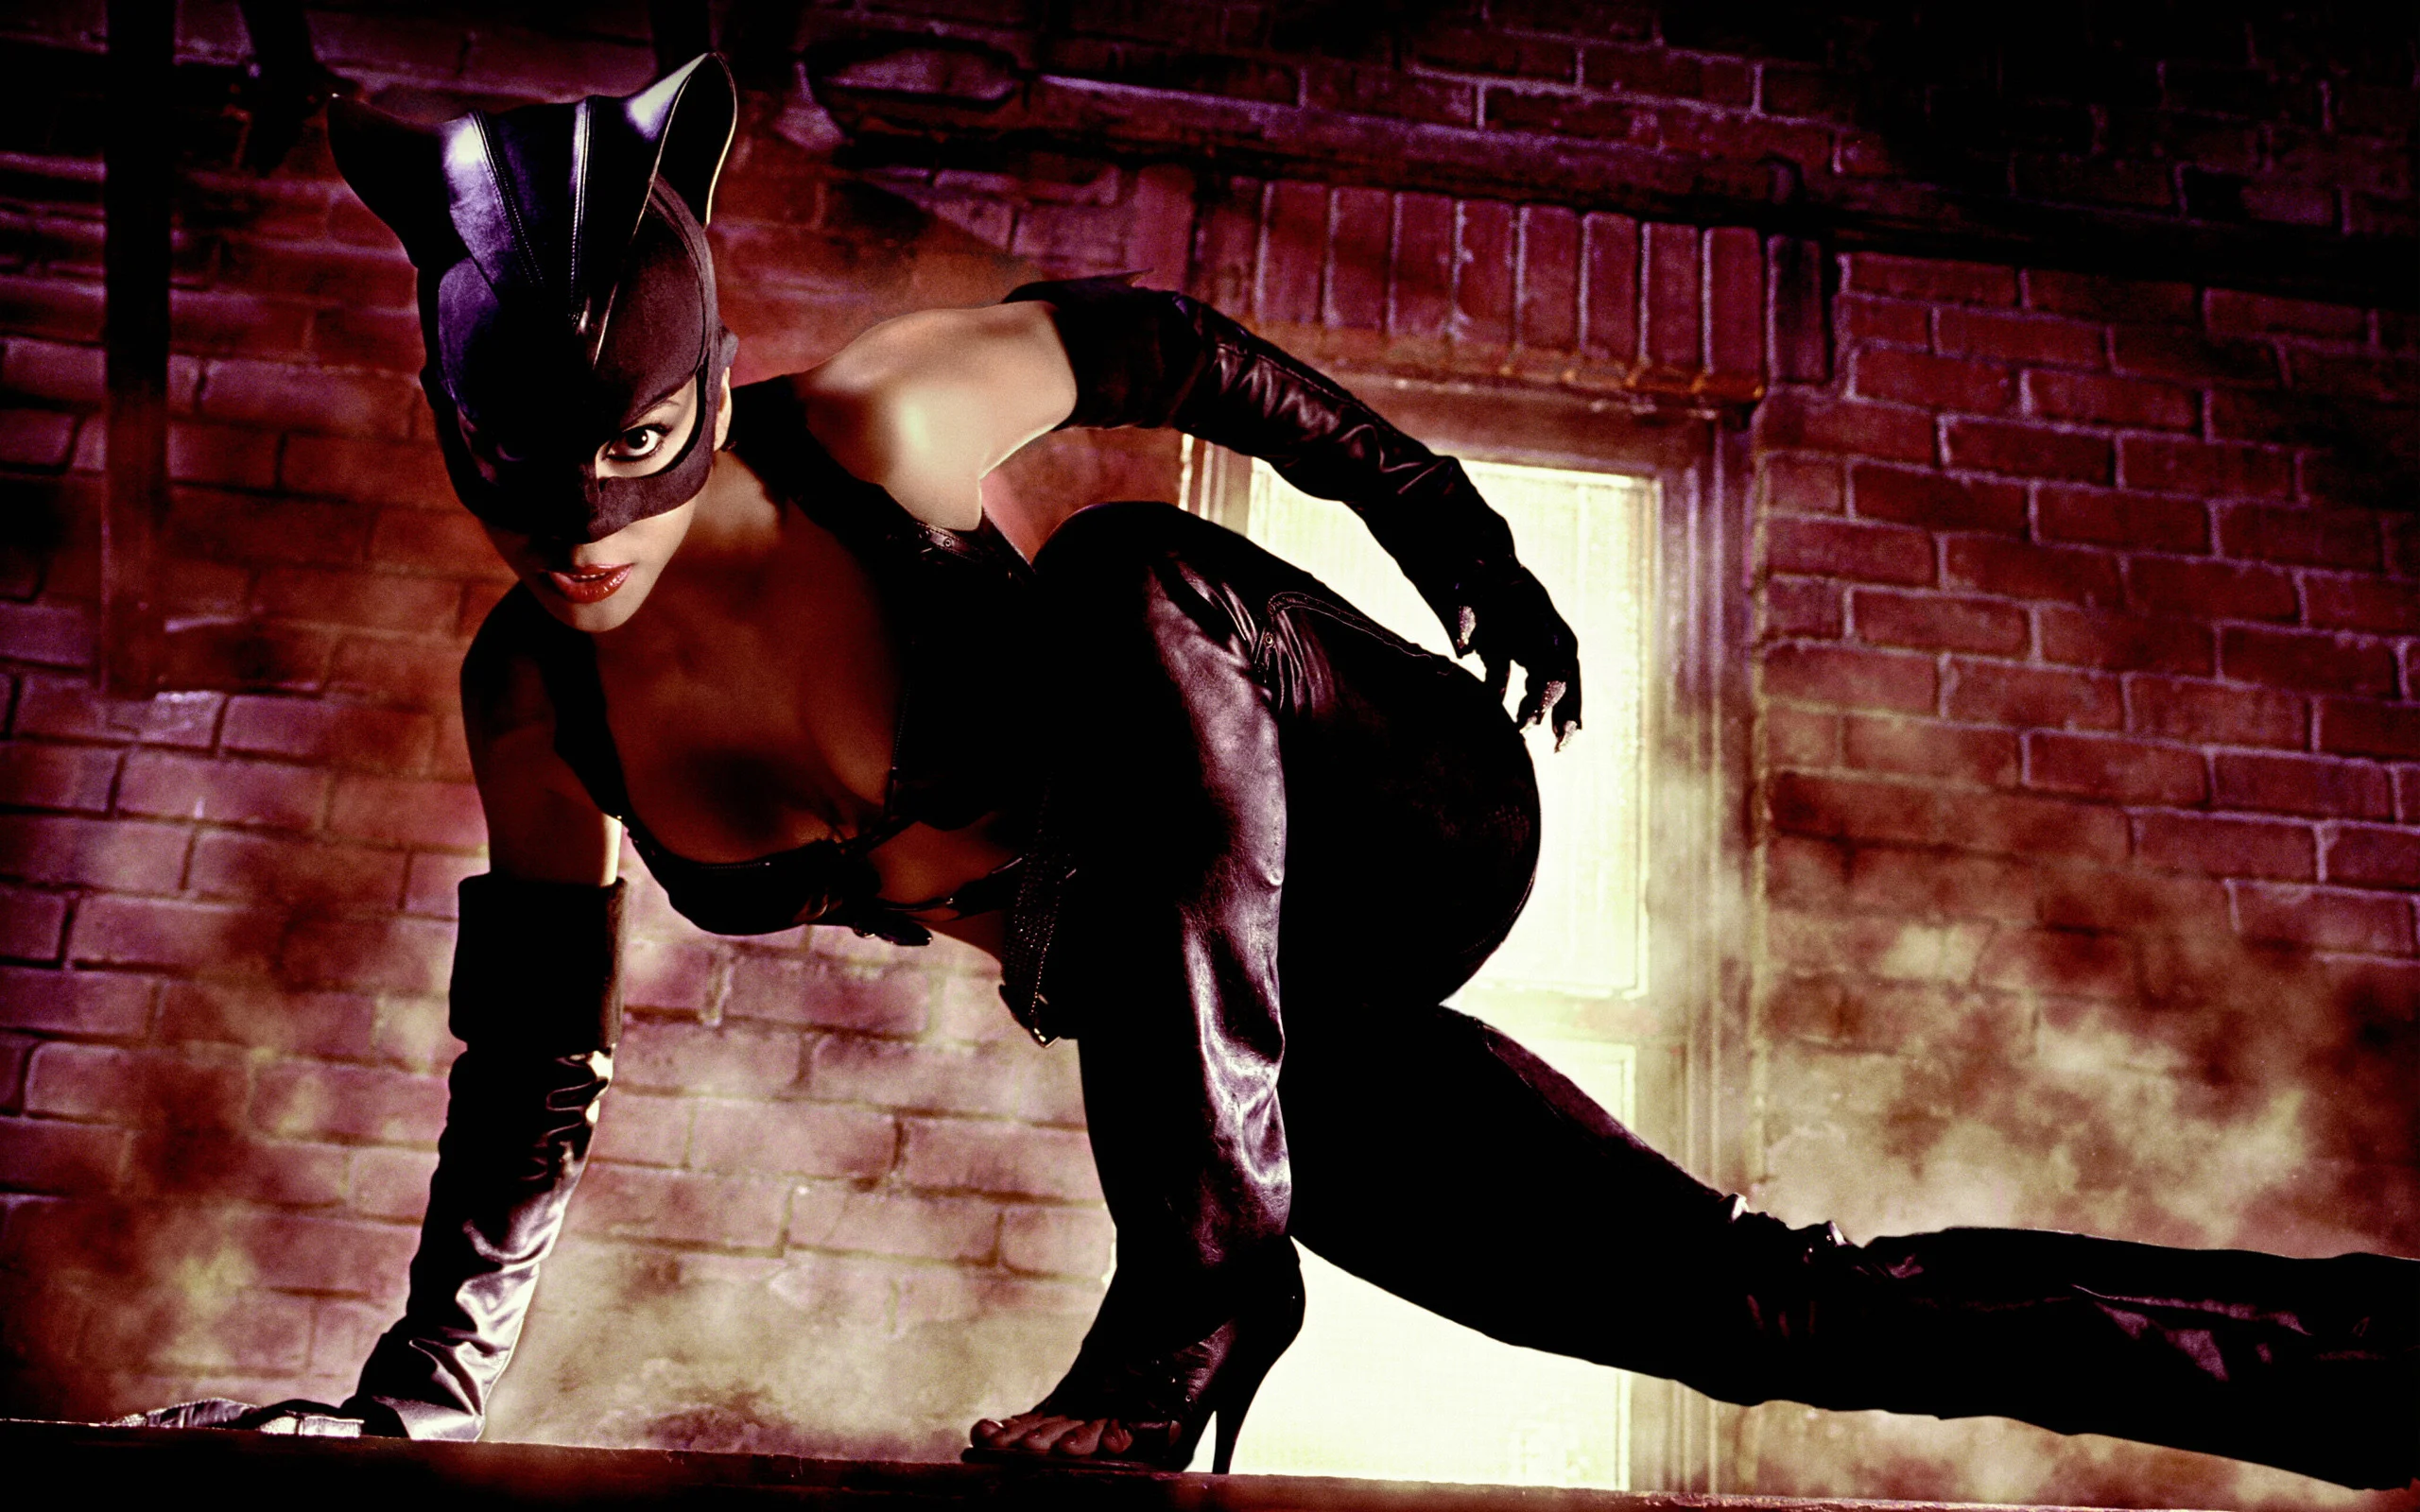 Halle Berry Catwoman